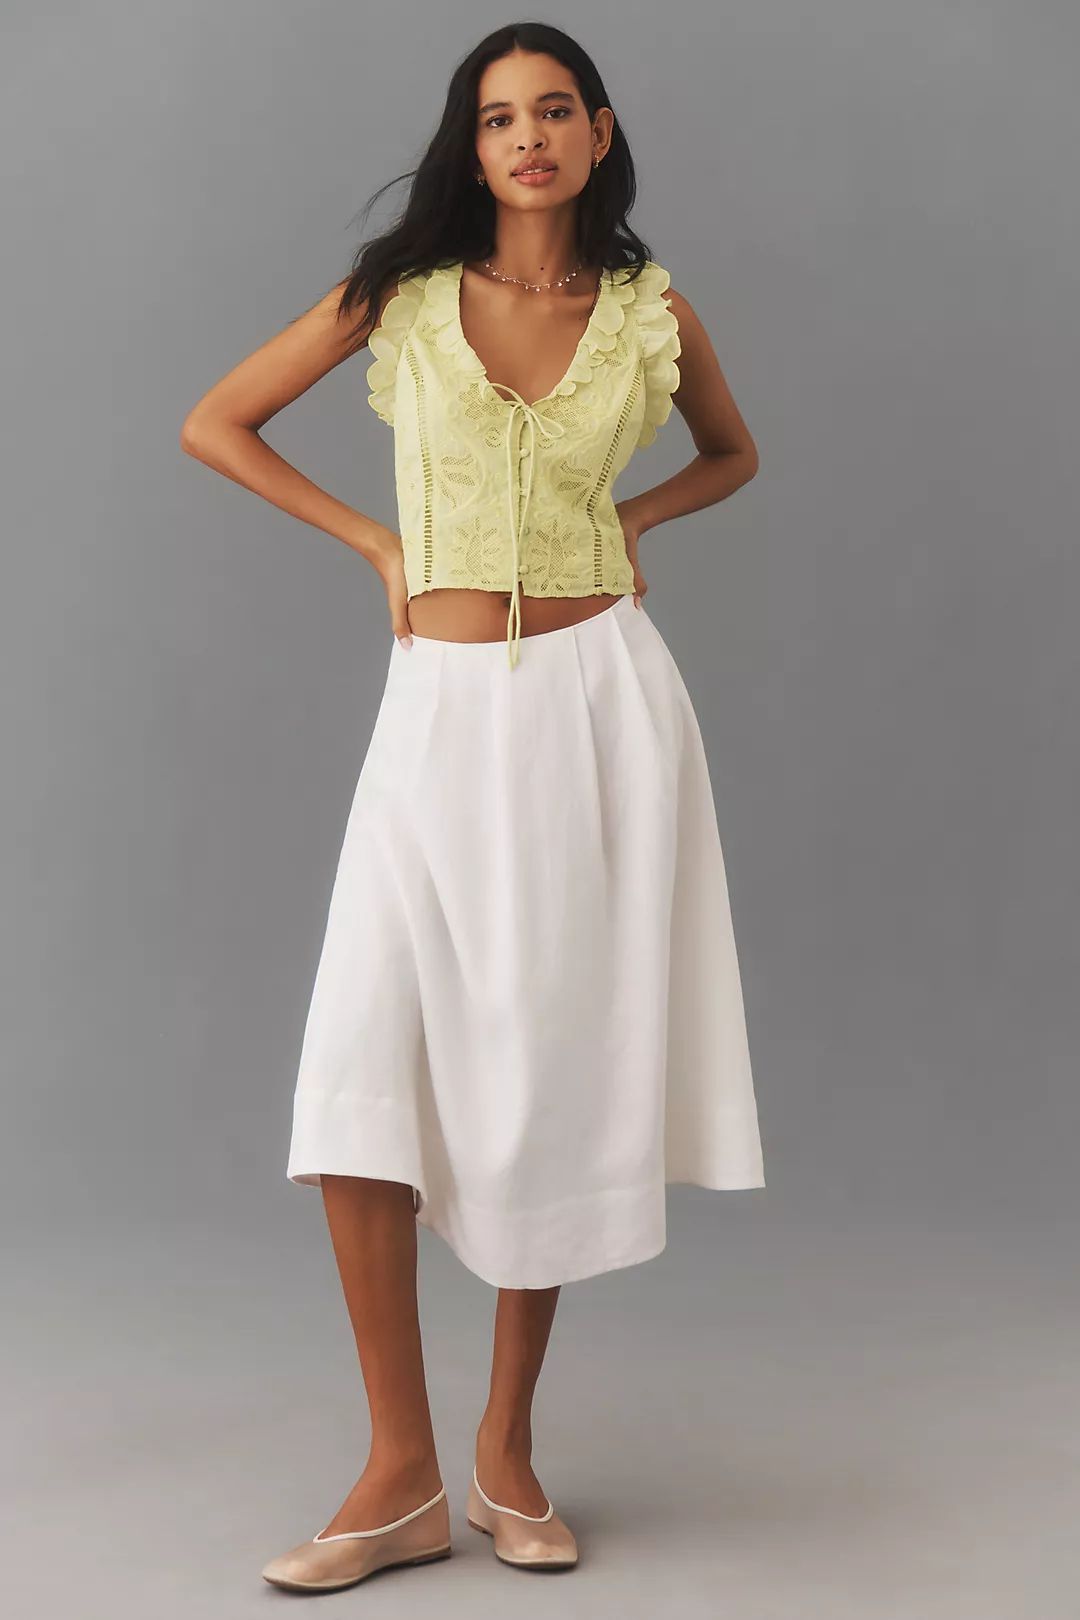 By Anthropologie Sleeveless Ruffled Top | Anthropologie (US)